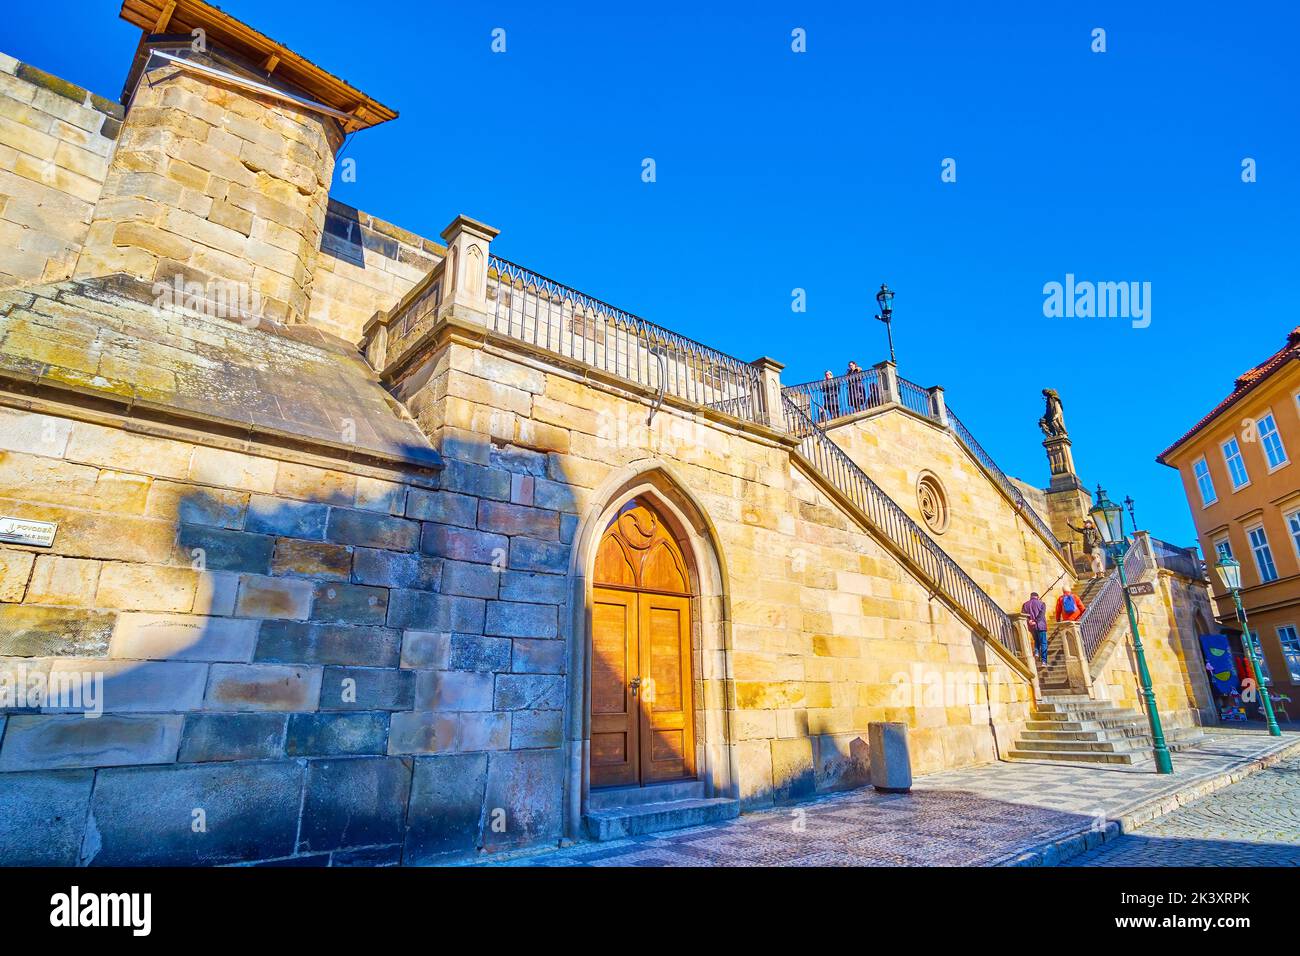 PRAGUE, CZECH REPUBLIC - MARCH 12, 2022: The historic stone staircases of Charles Bridge to Kampa island in Mala Strana district, on March 12 in Pragu Stock Photo